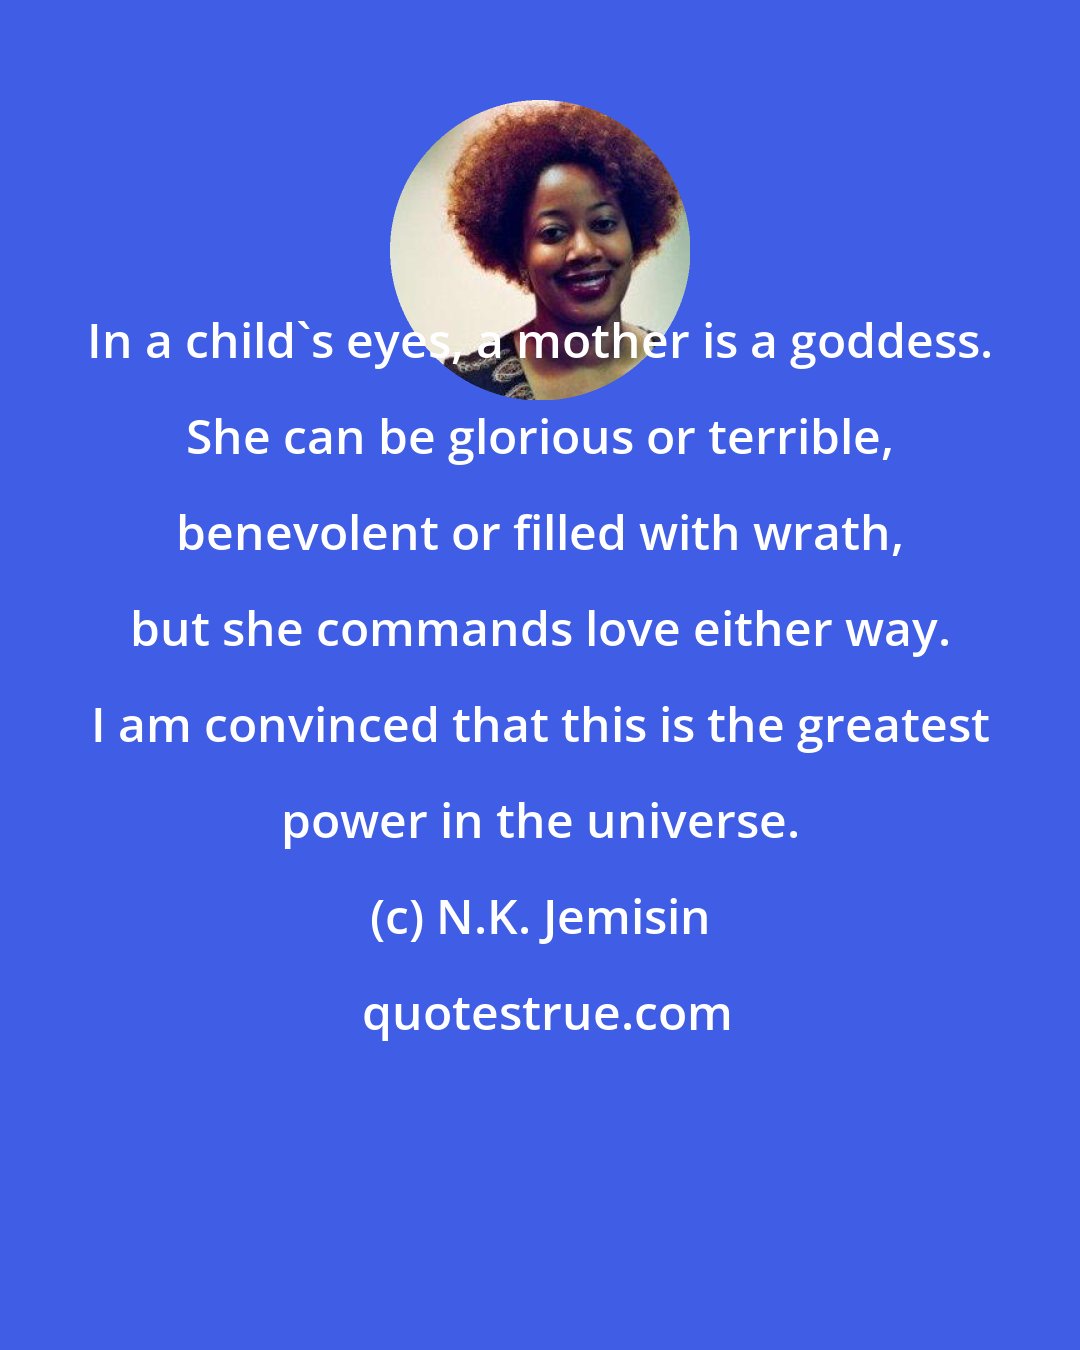 N.K. Jemisin: In a child's eyes, a mother is a goddess. She can be glorious or terrible, benevolent or filled with wrath, but she commands love either way. I am convinced that this is the greatest power in the universe.